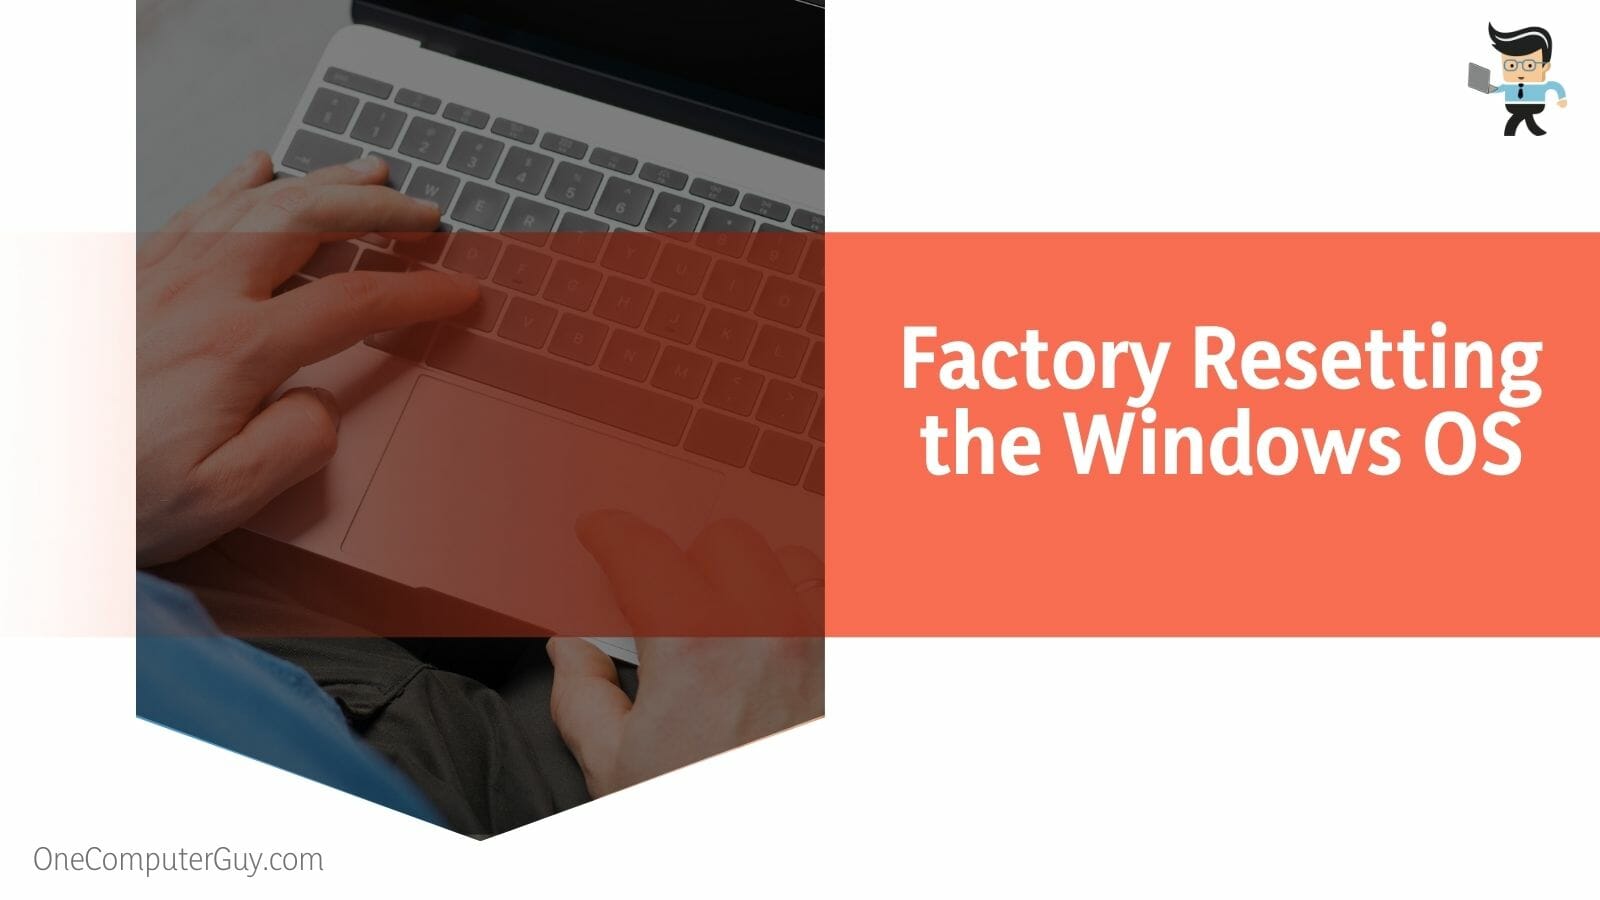 Factory Resetting the Windows OS